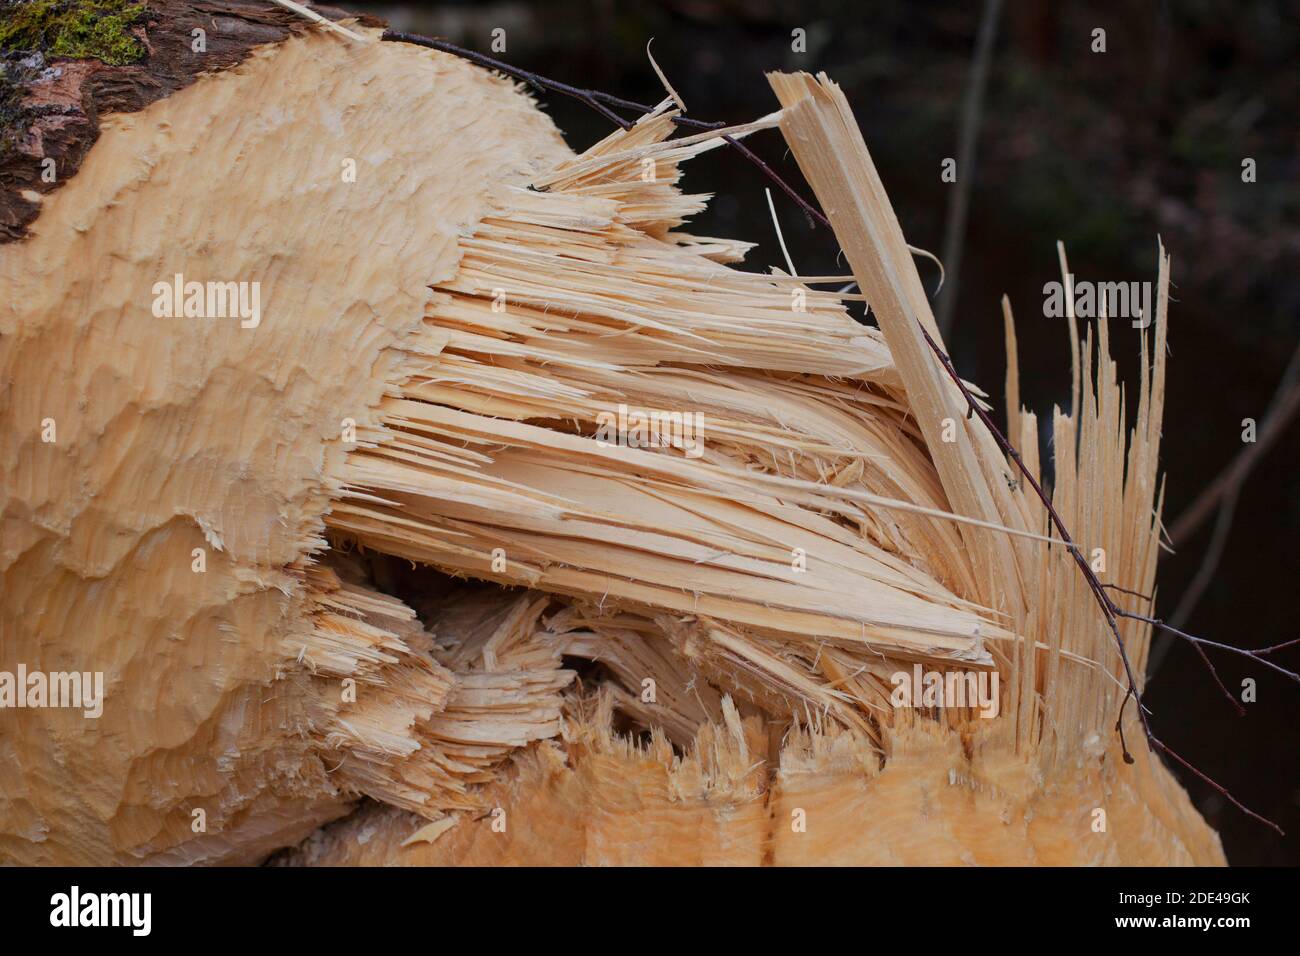 close-up of tree gnawed by the beaver, beaver teeth marks on a tree trunks, low DOF, natural gackground Stock Photo